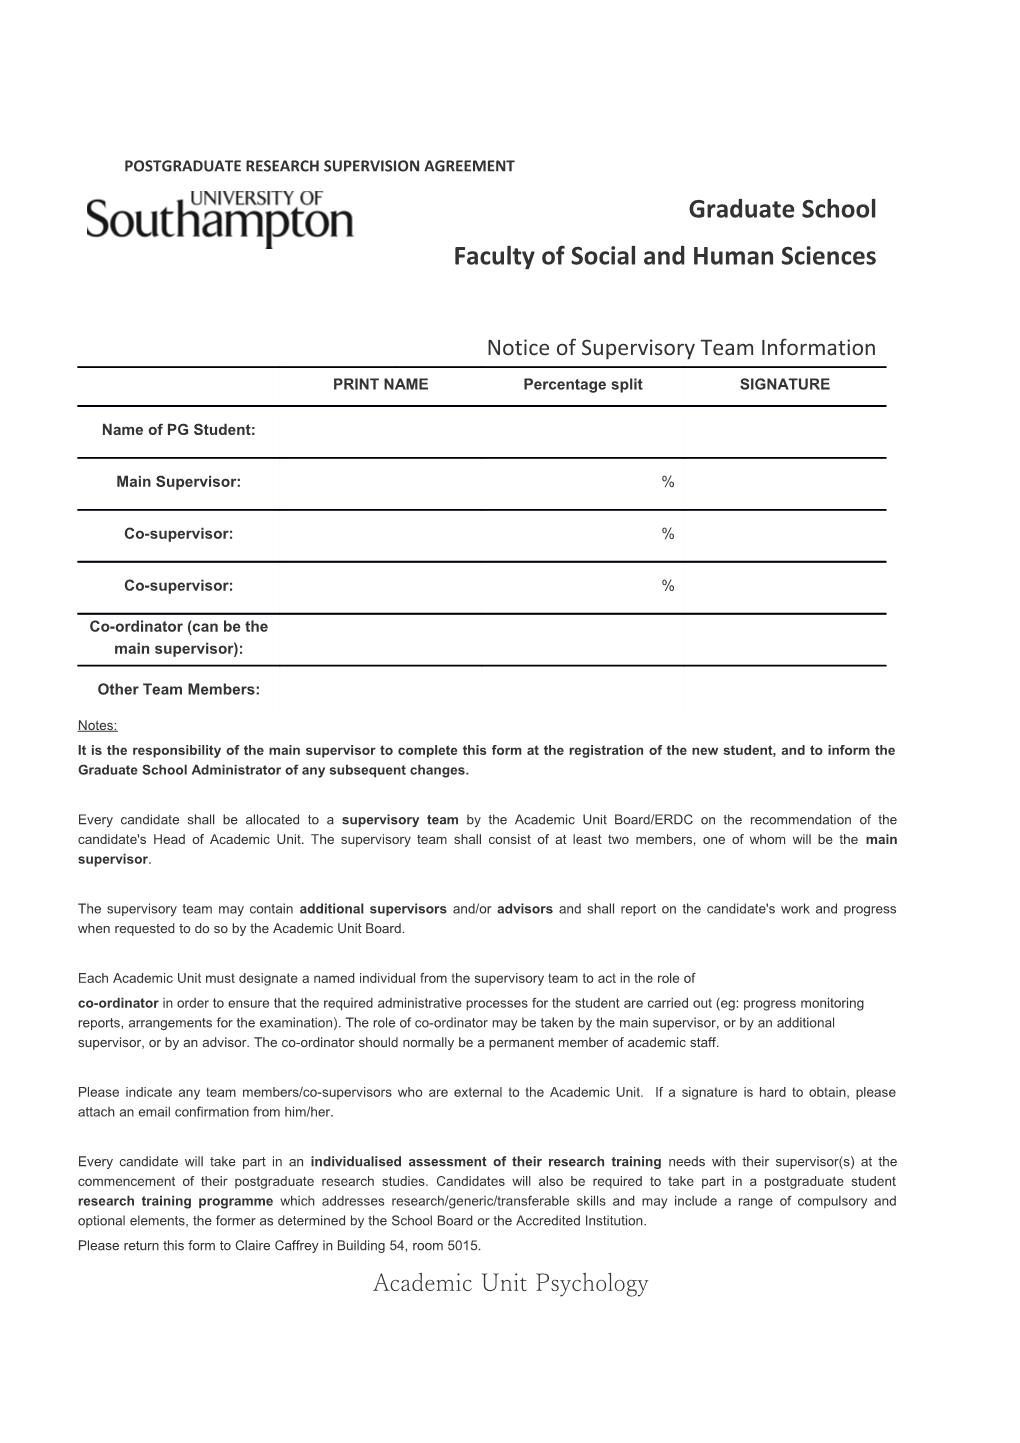 Postgraduate Research Supervision Agreement